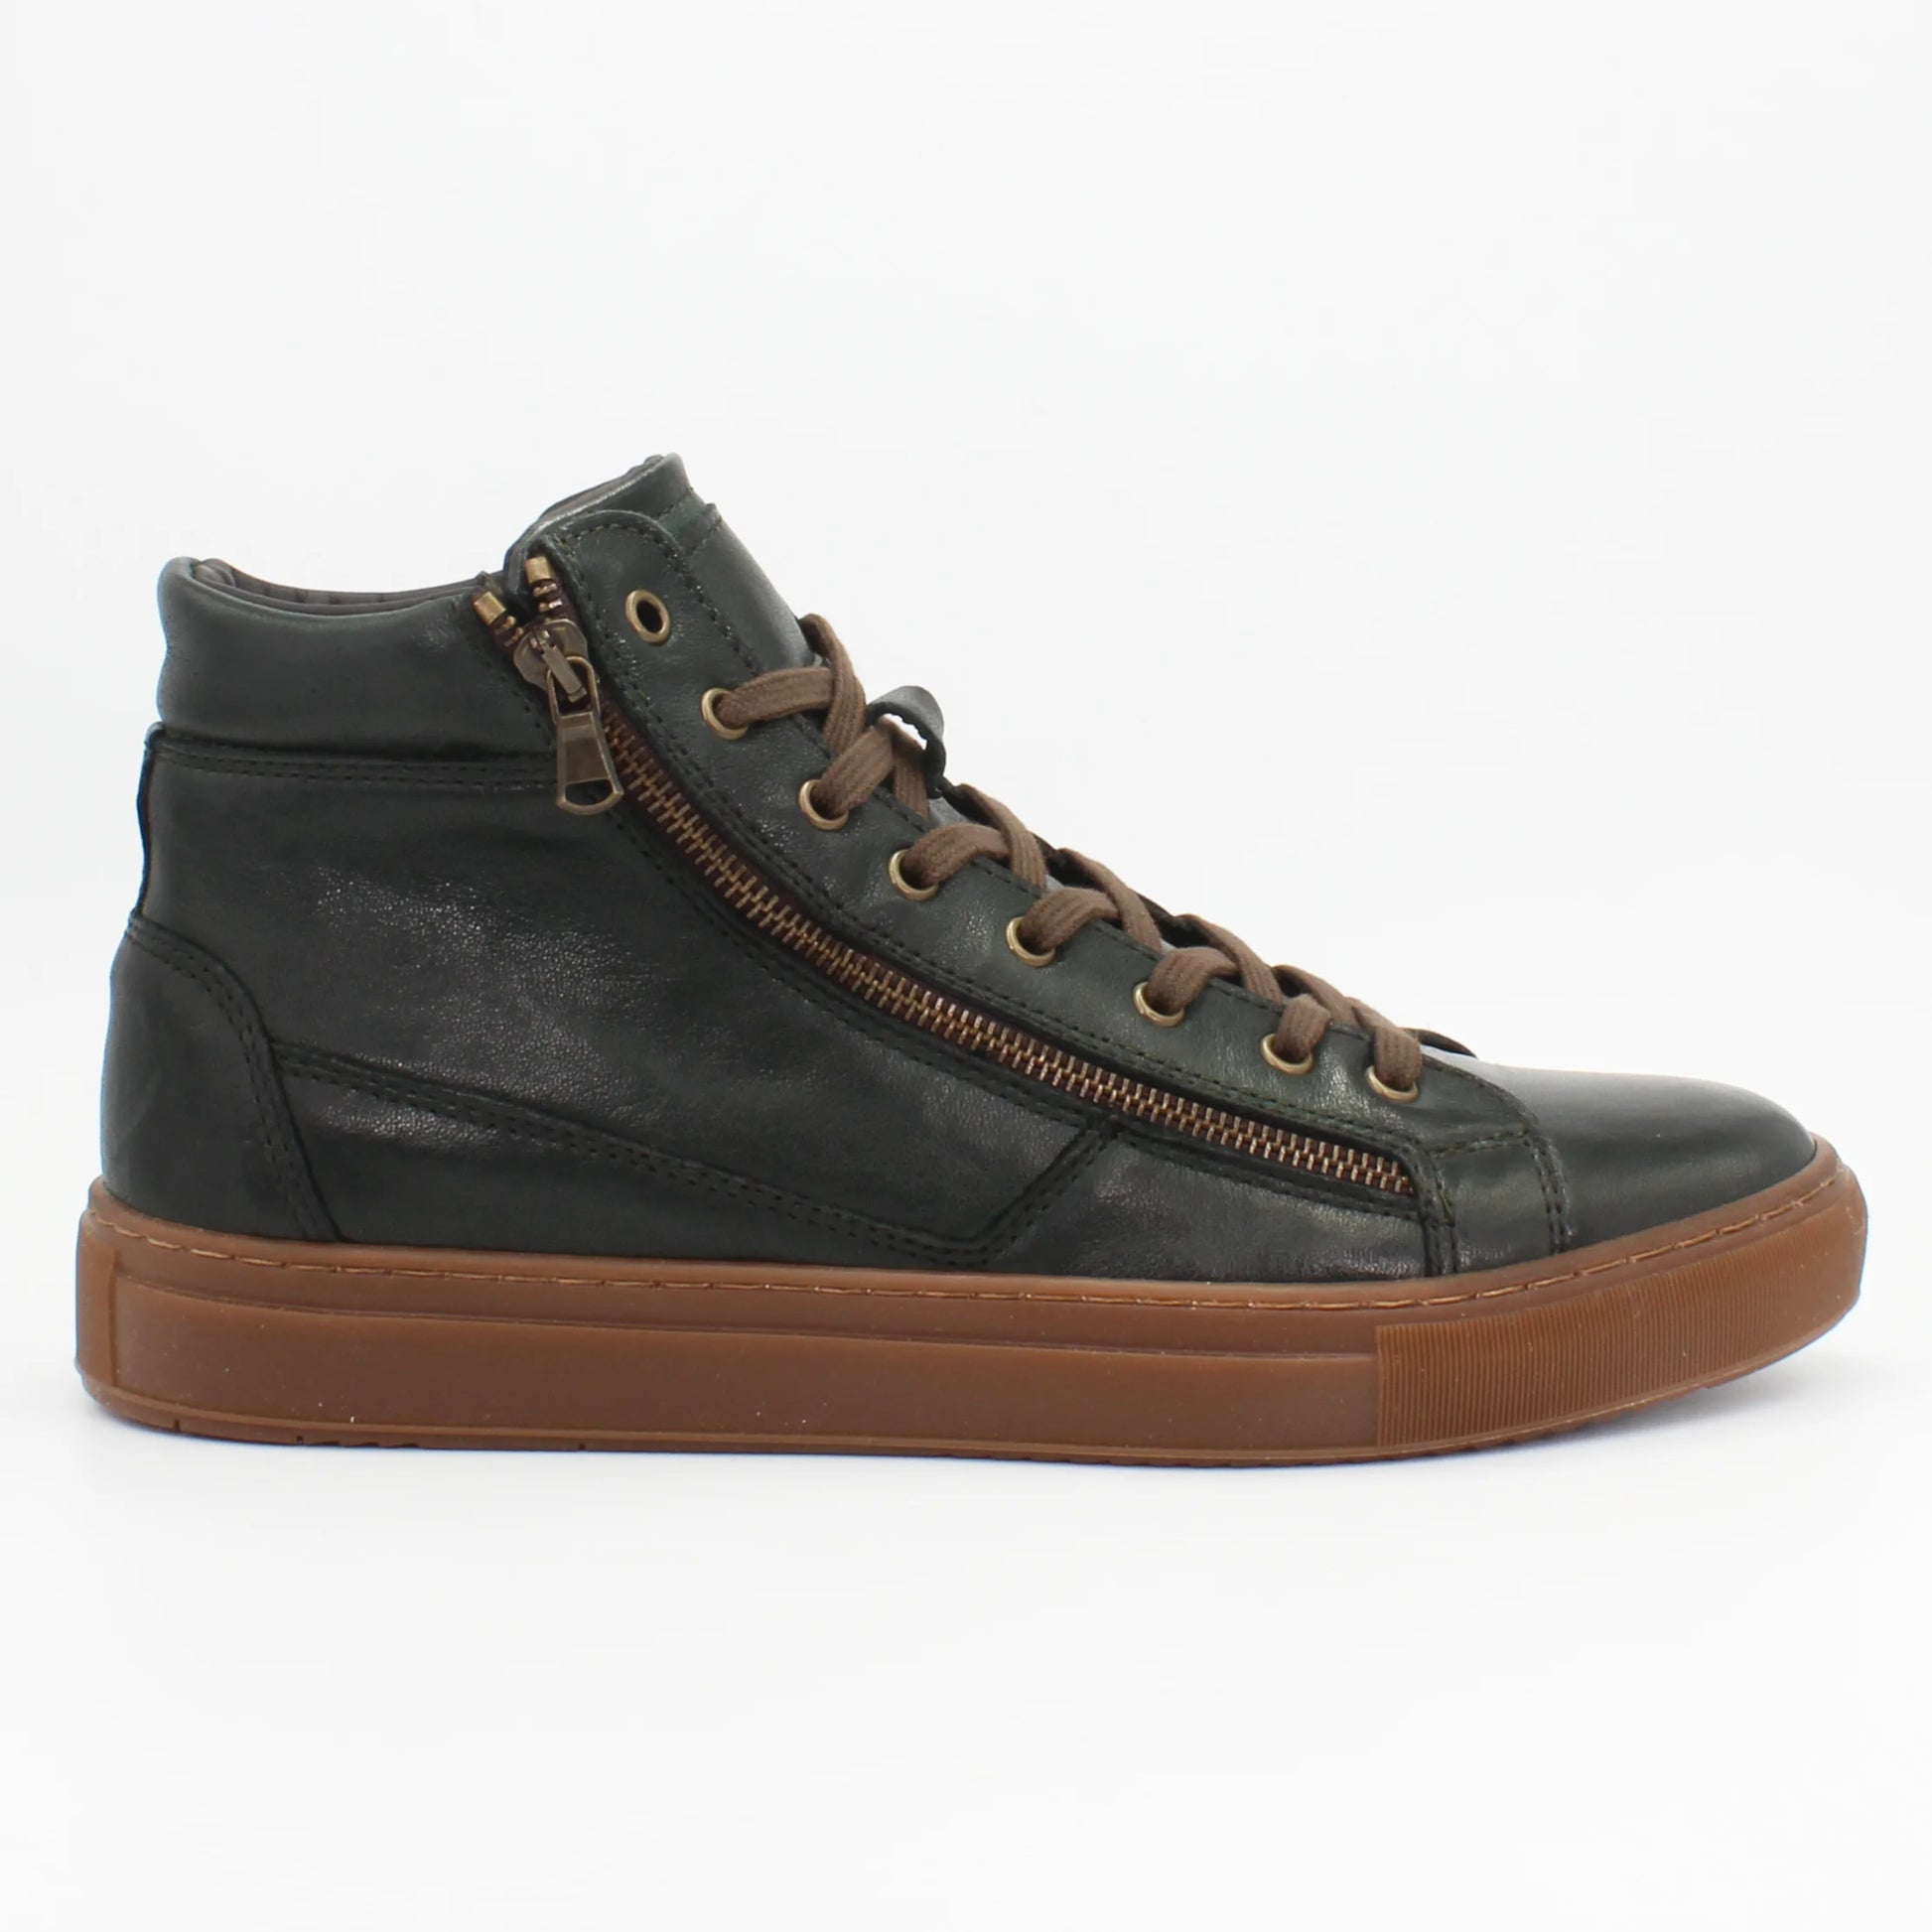 Shop Handmade Italian Leather High Top Sneaker in Verde (Cairo)  or browse our range of hand-made Italian shoes for men in leather or suede in-store at Aliverti Cape Town, or shop online. We deliver in South Africa & offer multiple payment plans as well as accept multiple safe & secure payment methods.